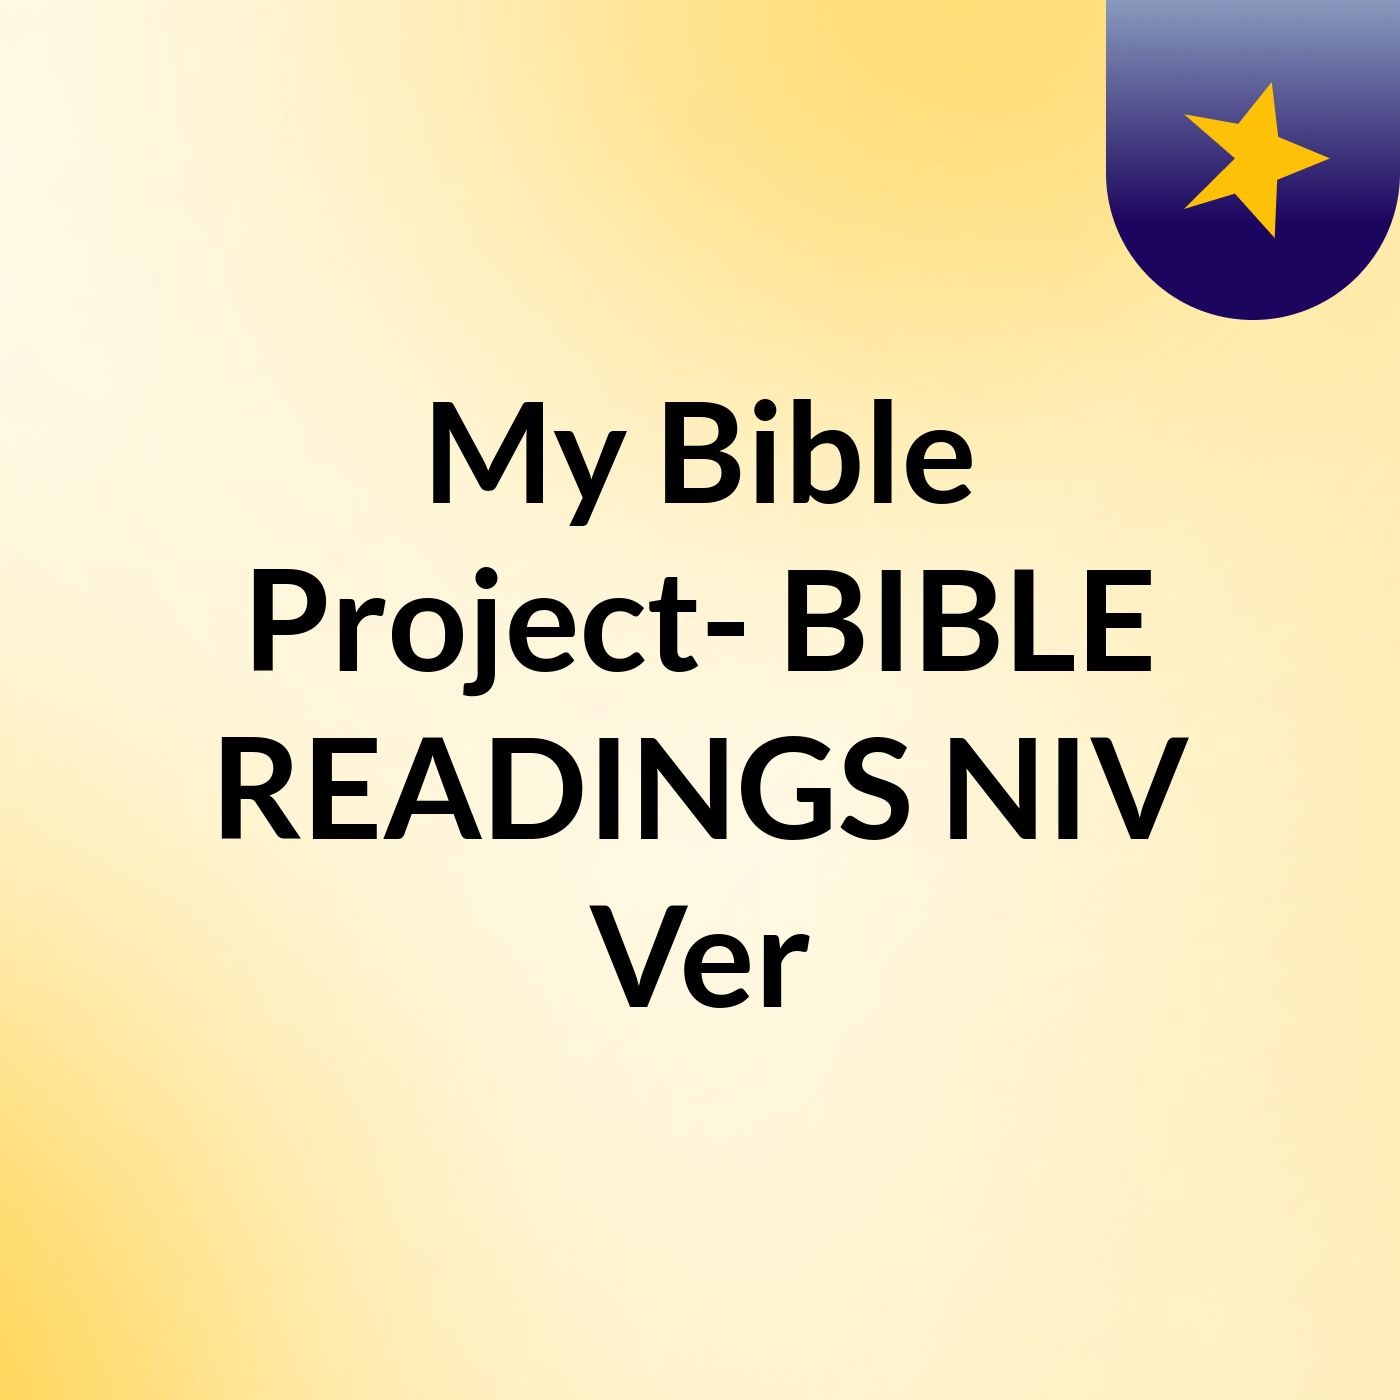 My Bible Project- BIBLE READINGS NIV Ver